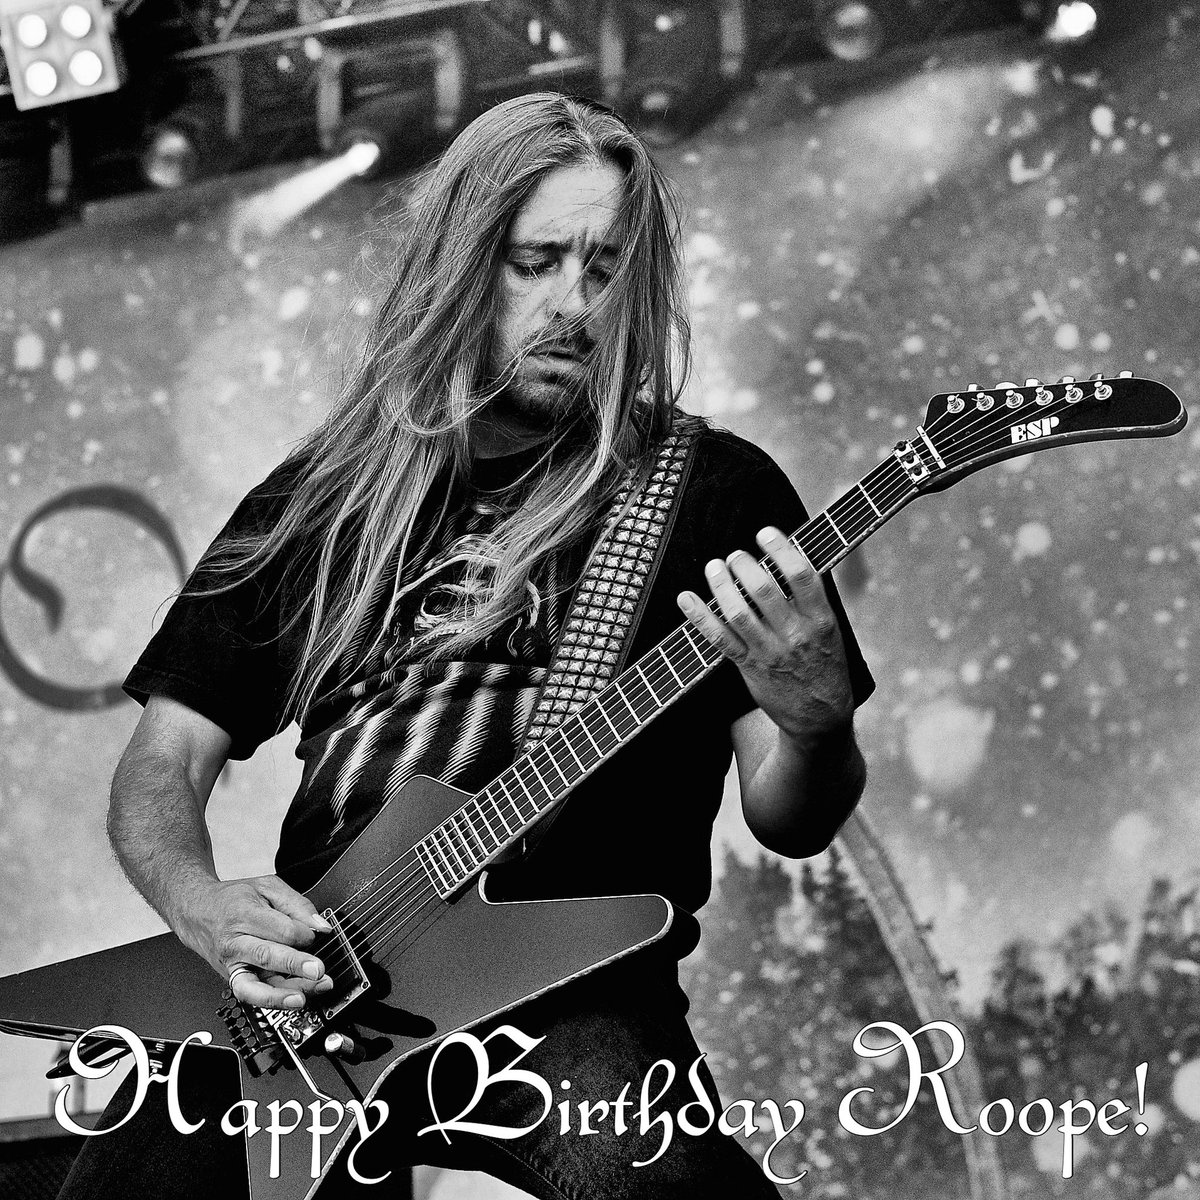 Happy Birthday Roope! Photo: Mike Jussila #cobhc